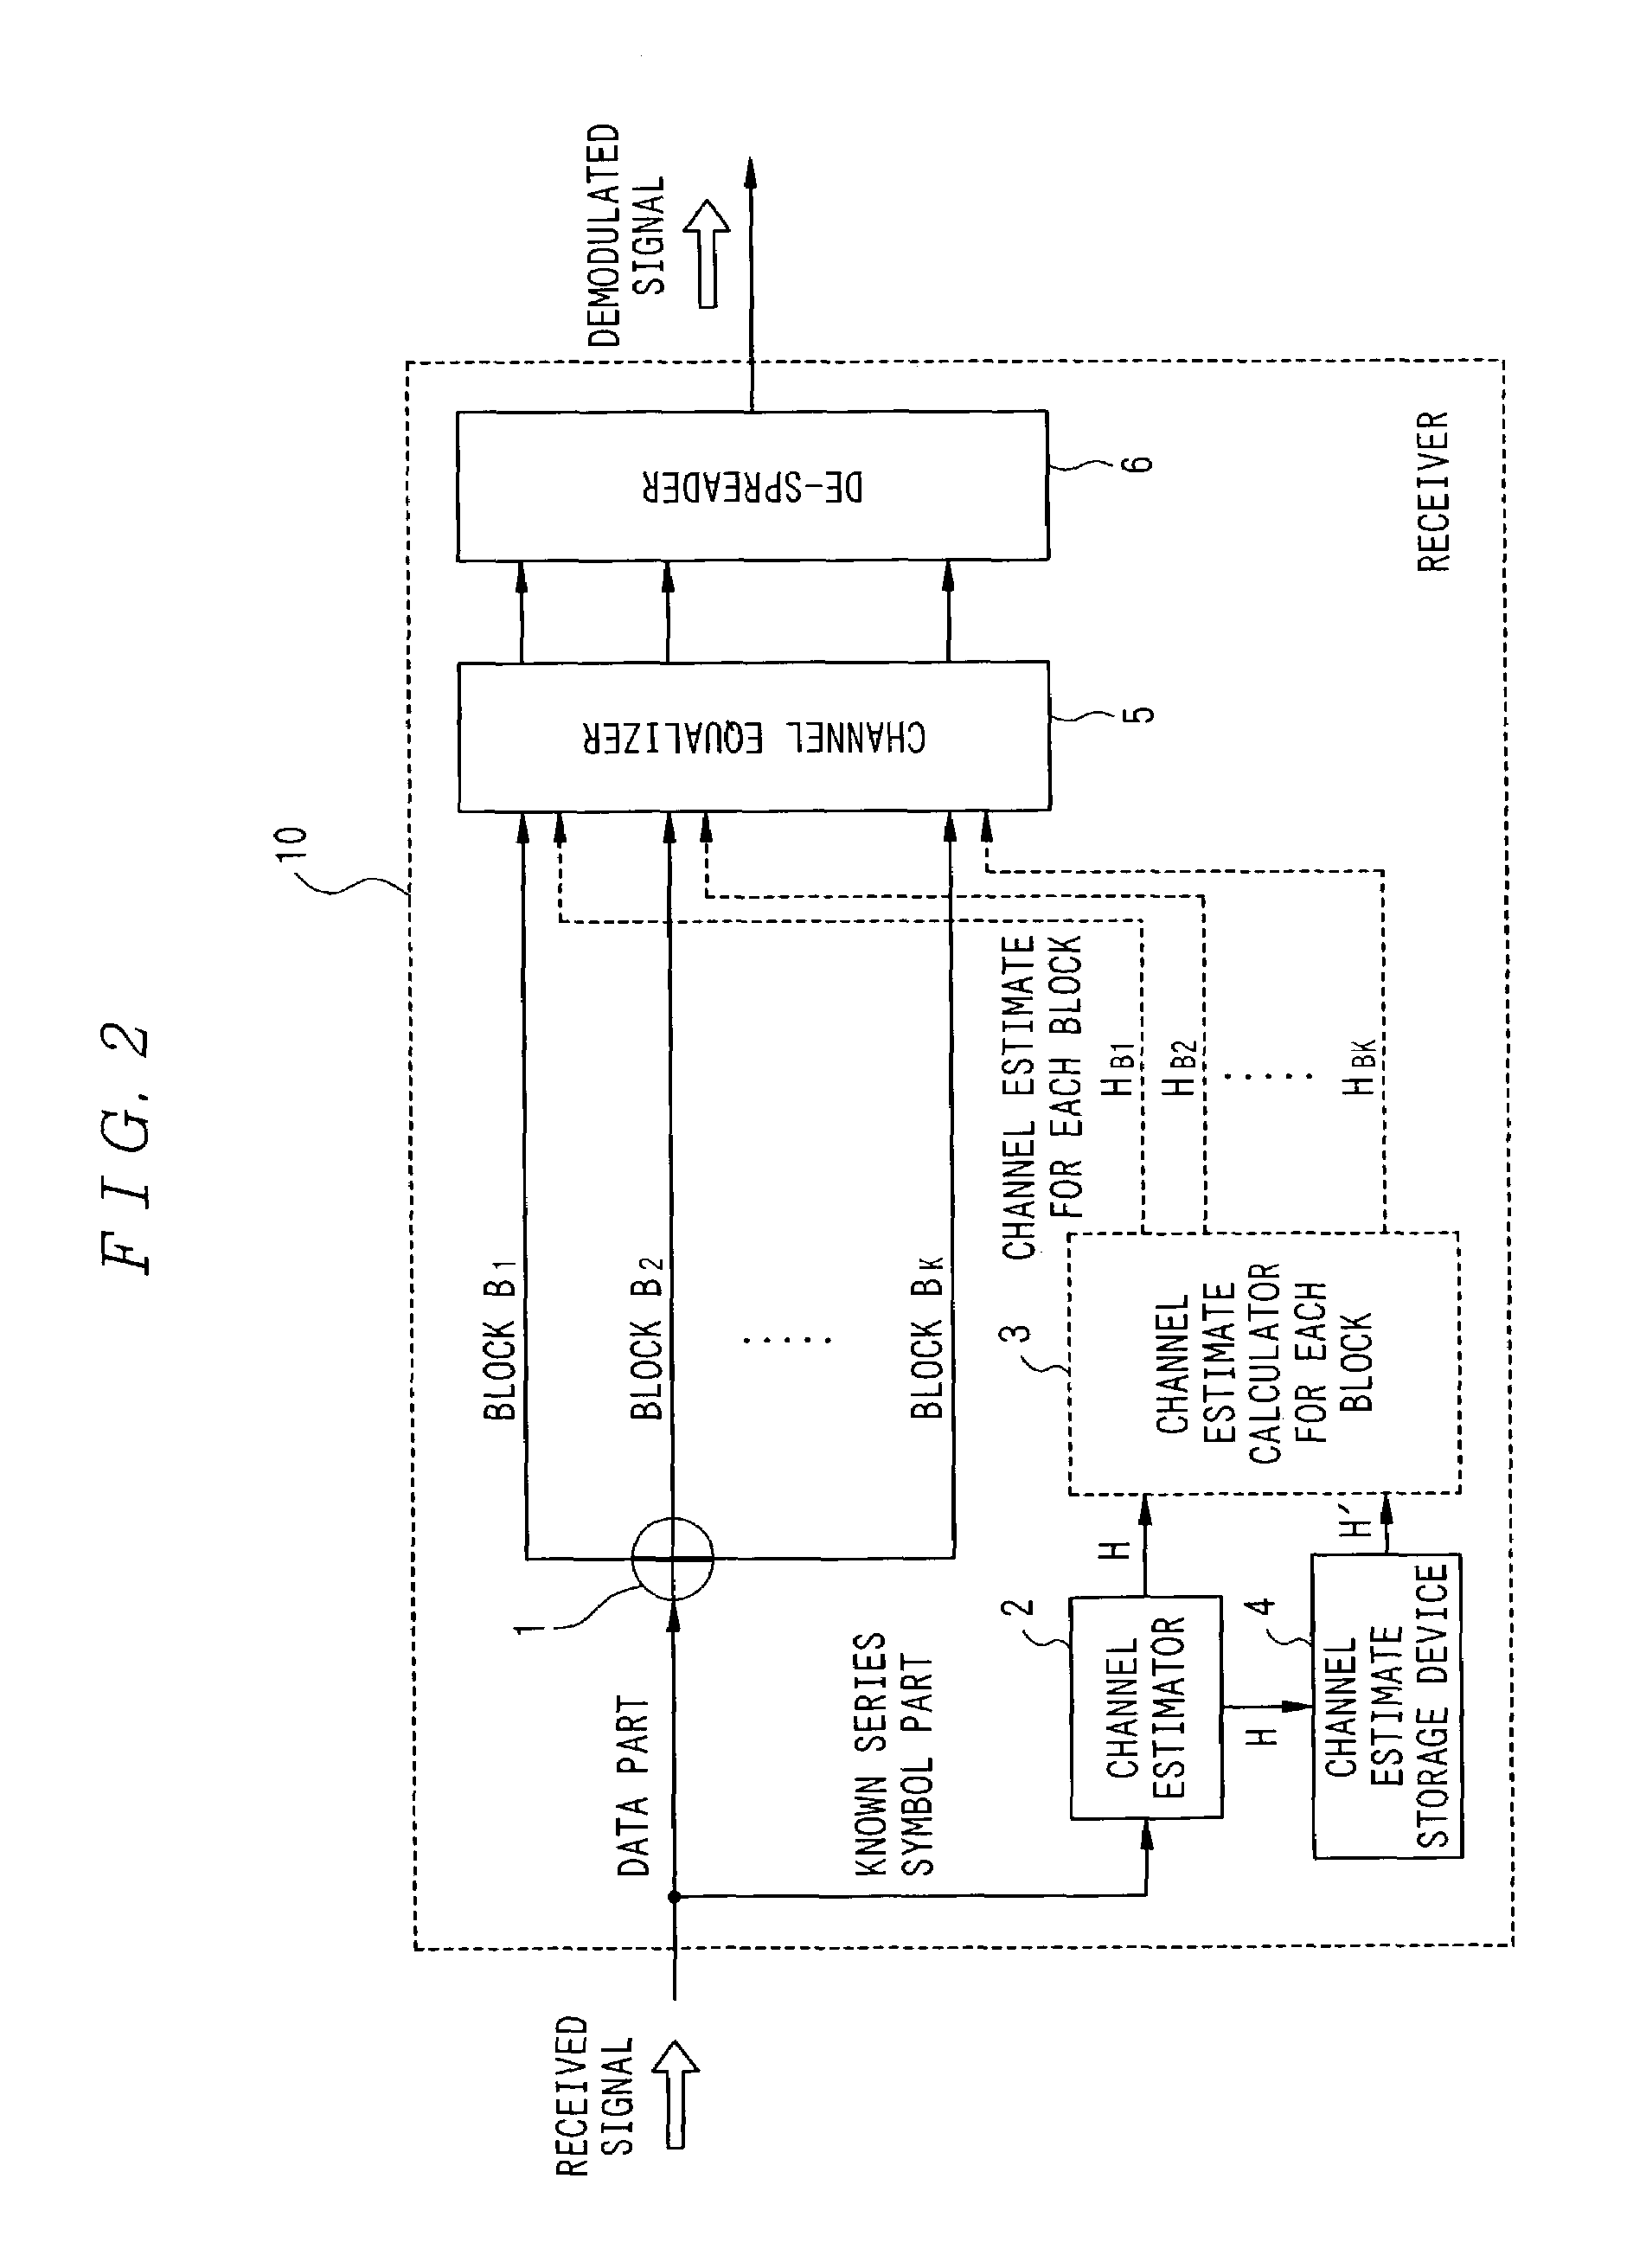 System and method of interference suppression